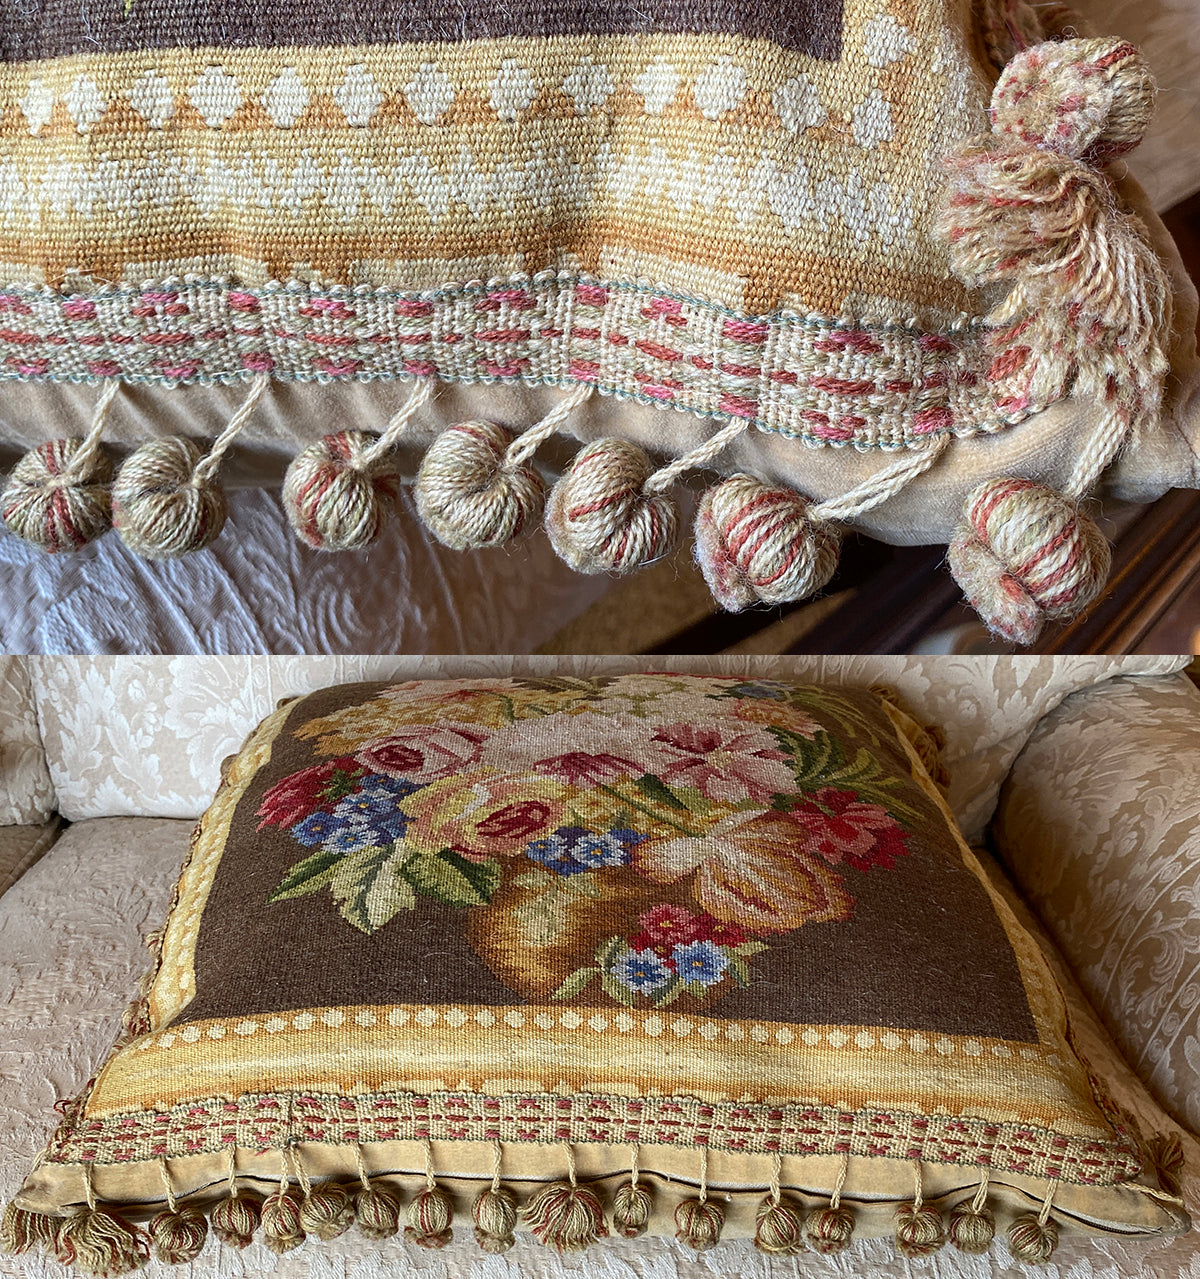 Superb 22" Square French Aubusson Tapestry Panel Vintage Pillow, Ball Fringe Passementerie